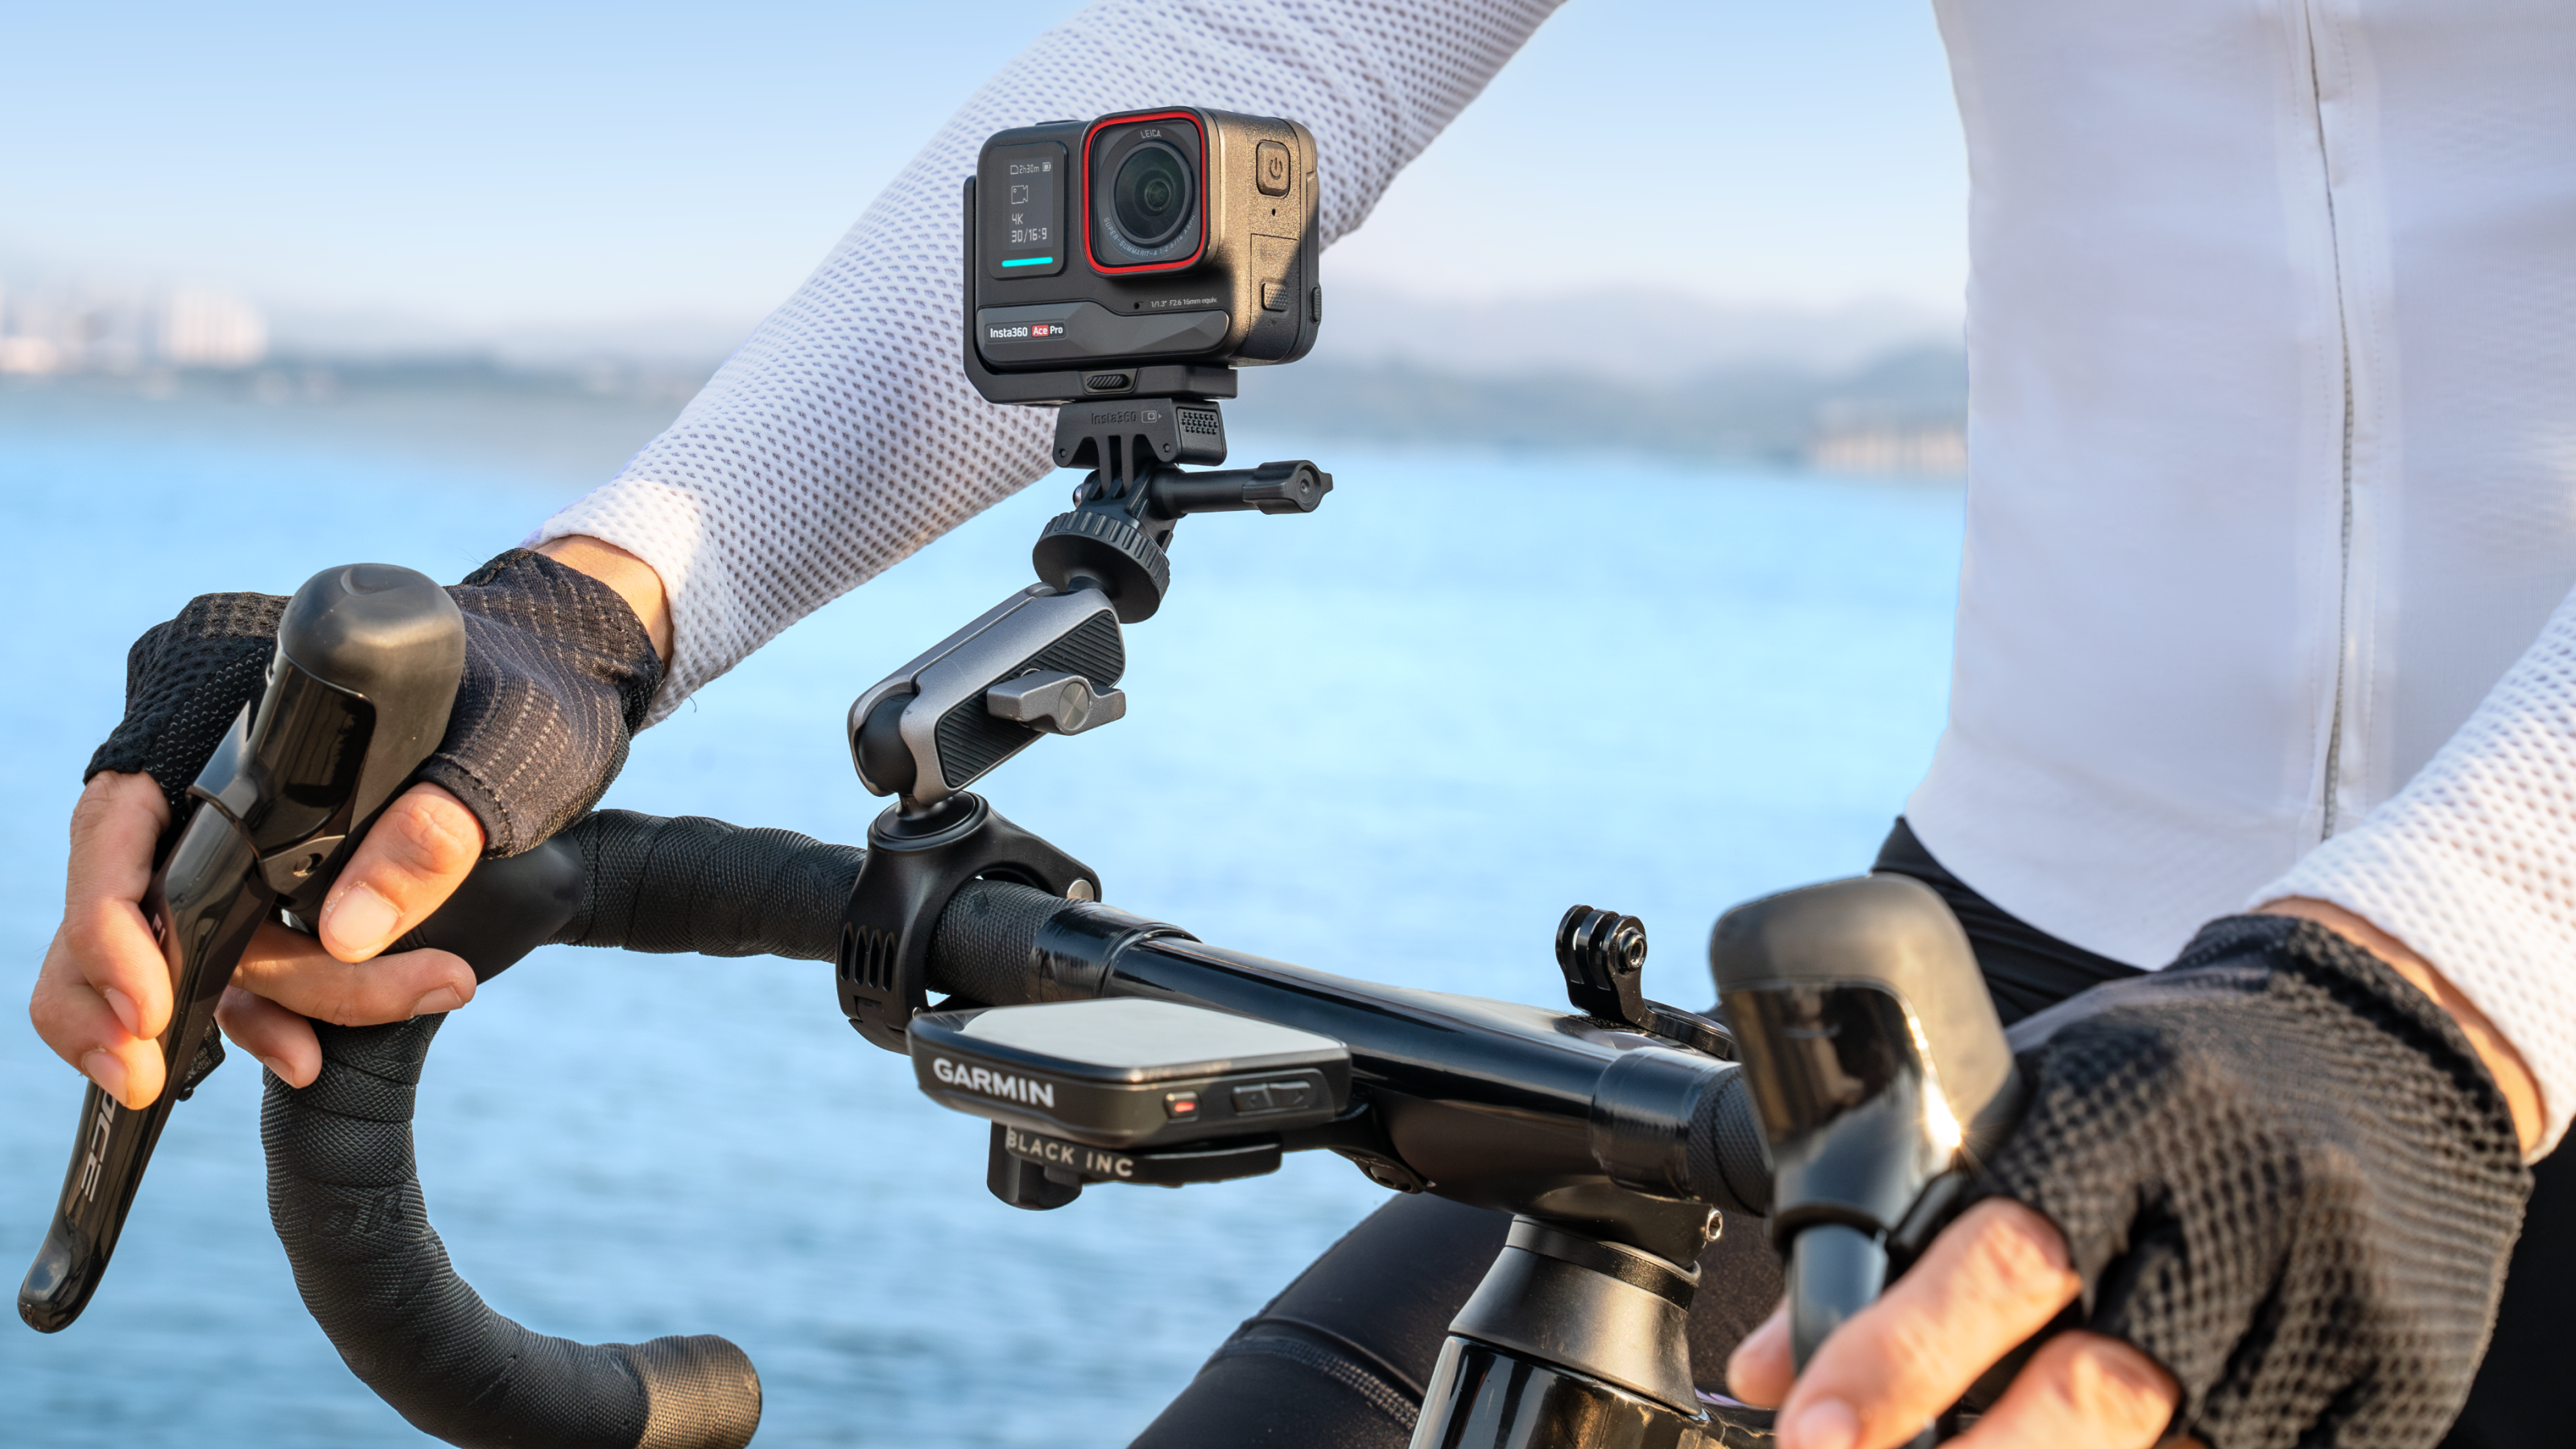 A cyclist mounting Ace Pro on their handlebars with Garmin remote pictured.